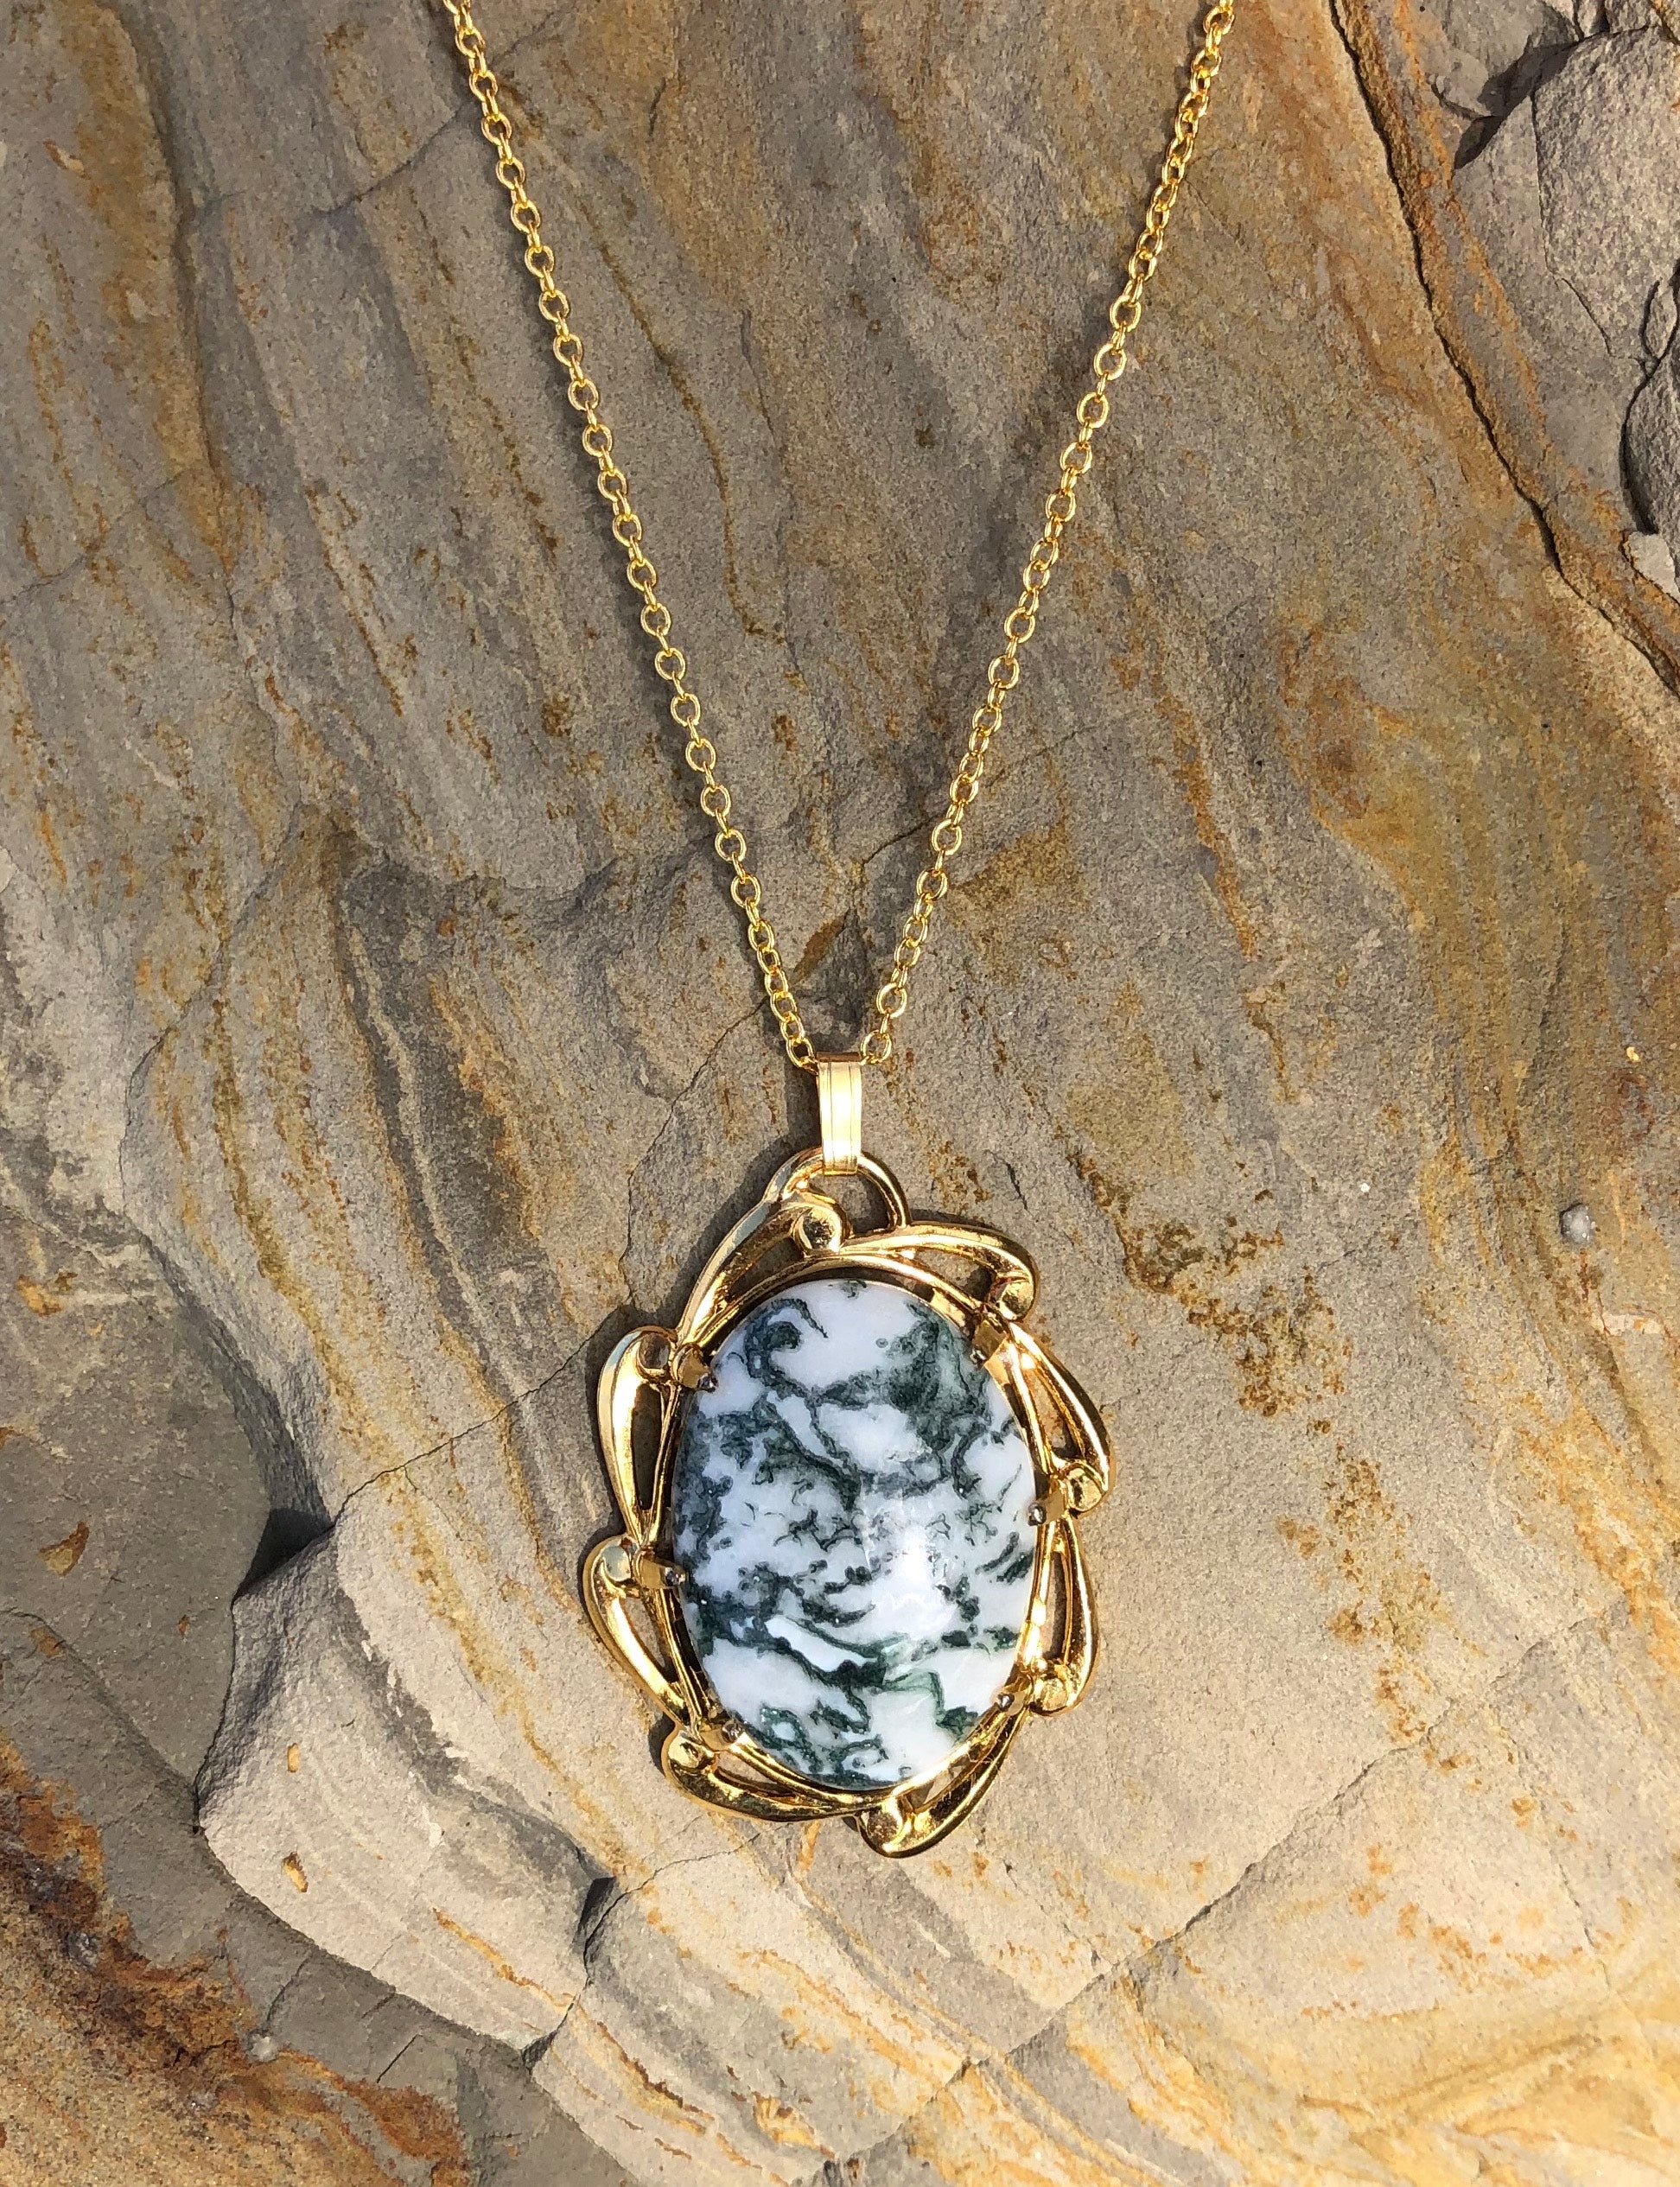 Necklace with natural Tree Agate, a unique type of moss agate with a white background behind fine green "moss". The stone is hand polished to a 25x18mm cabochon and set in a gold plated setting with 19 inch chain, on stone